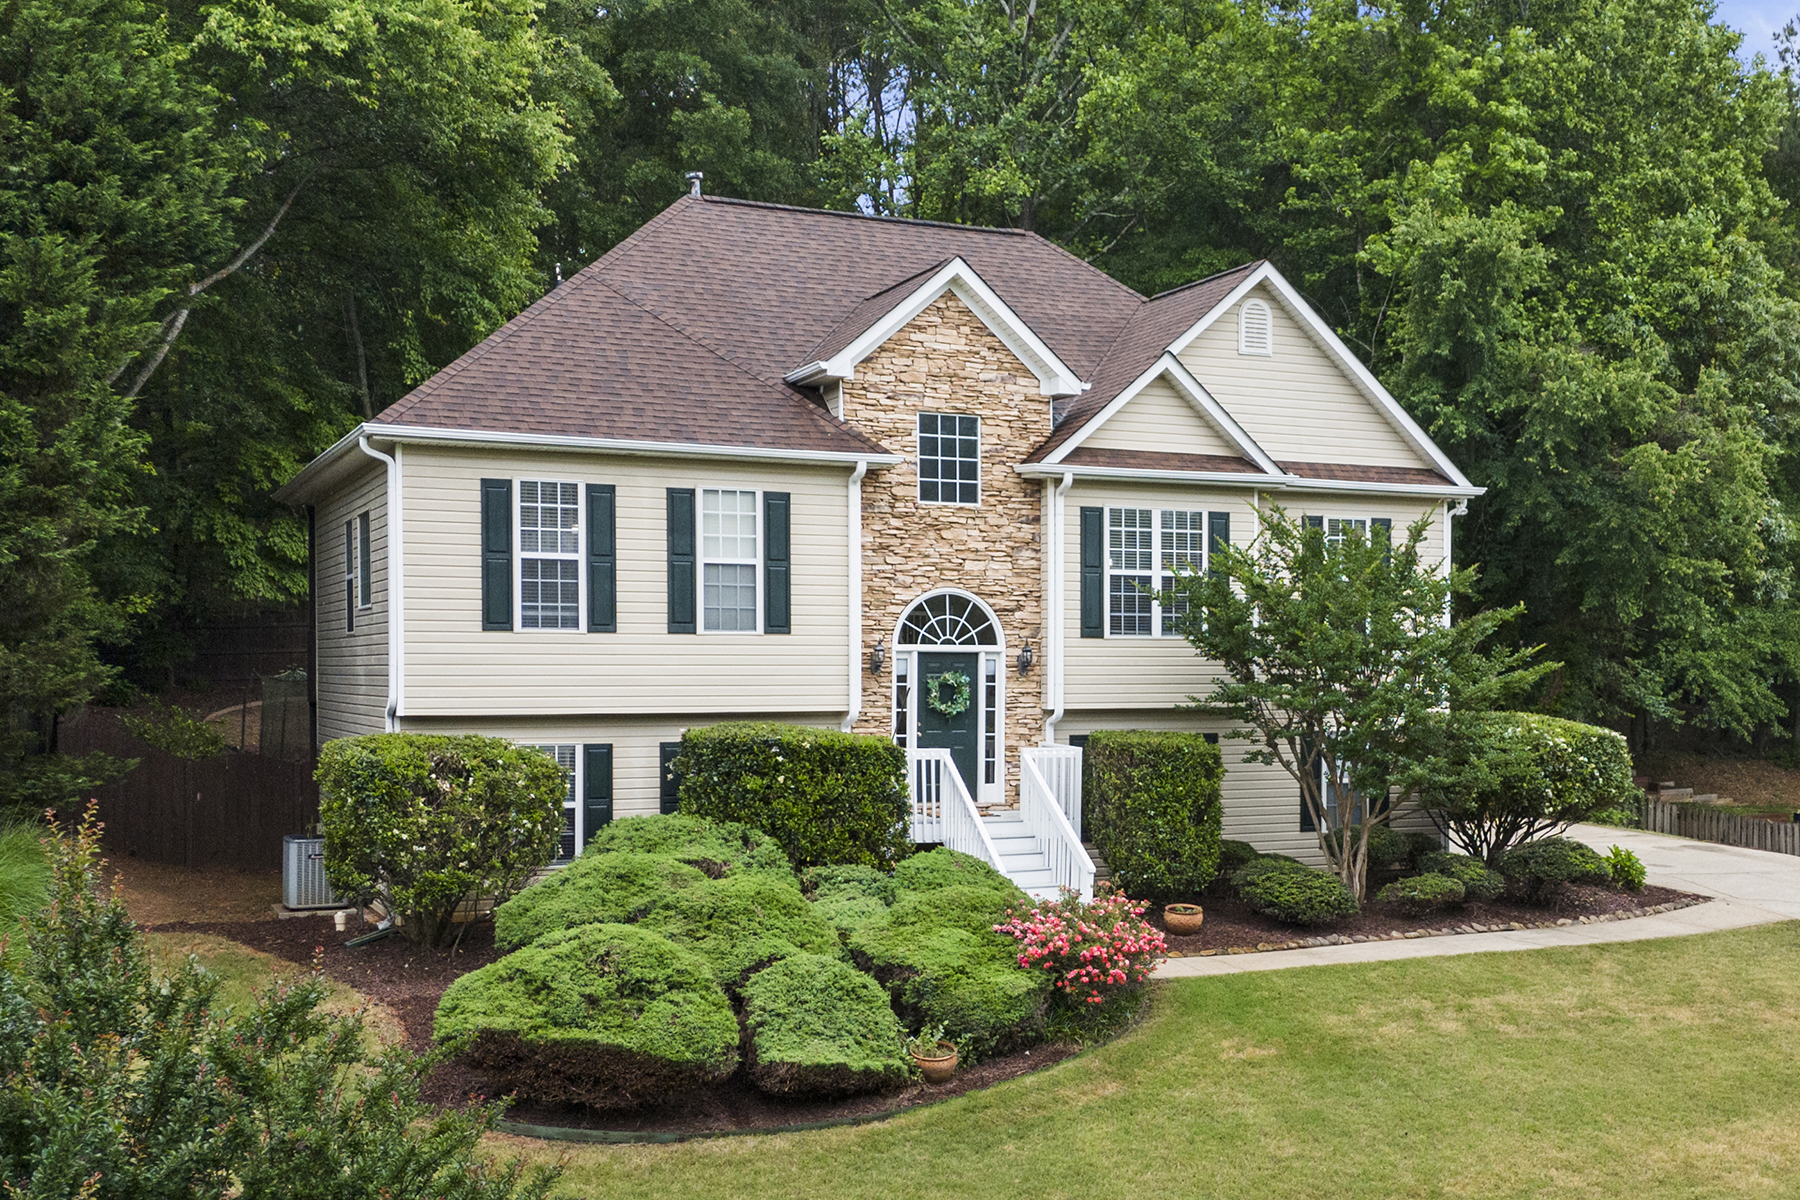 Beautiful Four Bedroom Home With Large Private Backyard in North Forsyth